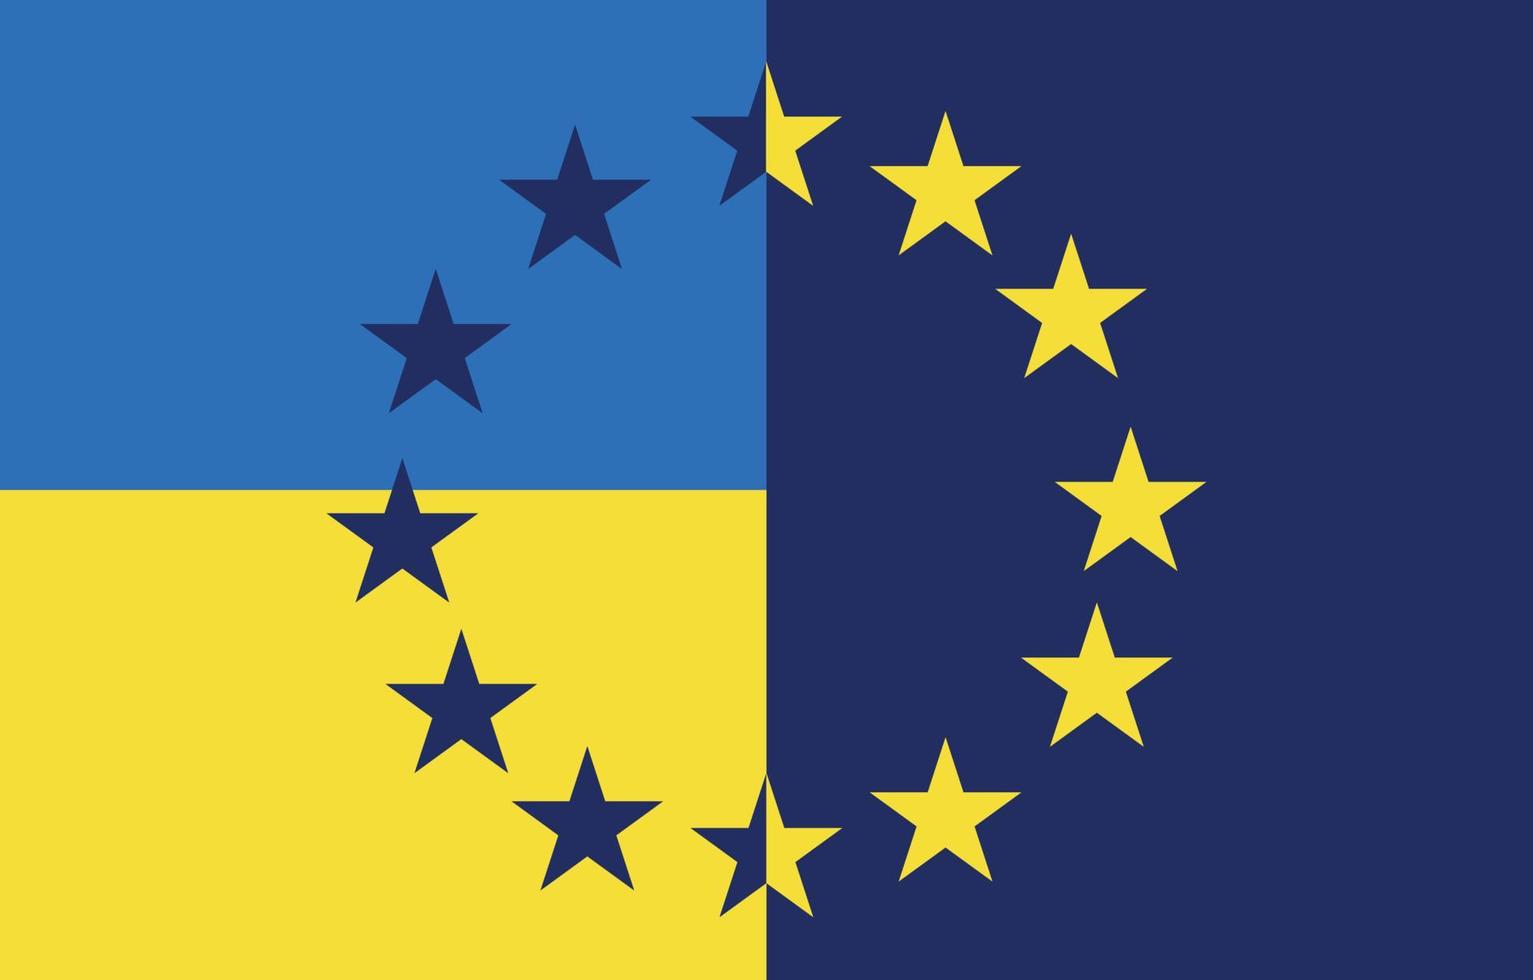 Ukrainian and European Union flag vector illustration.The concept of national independence